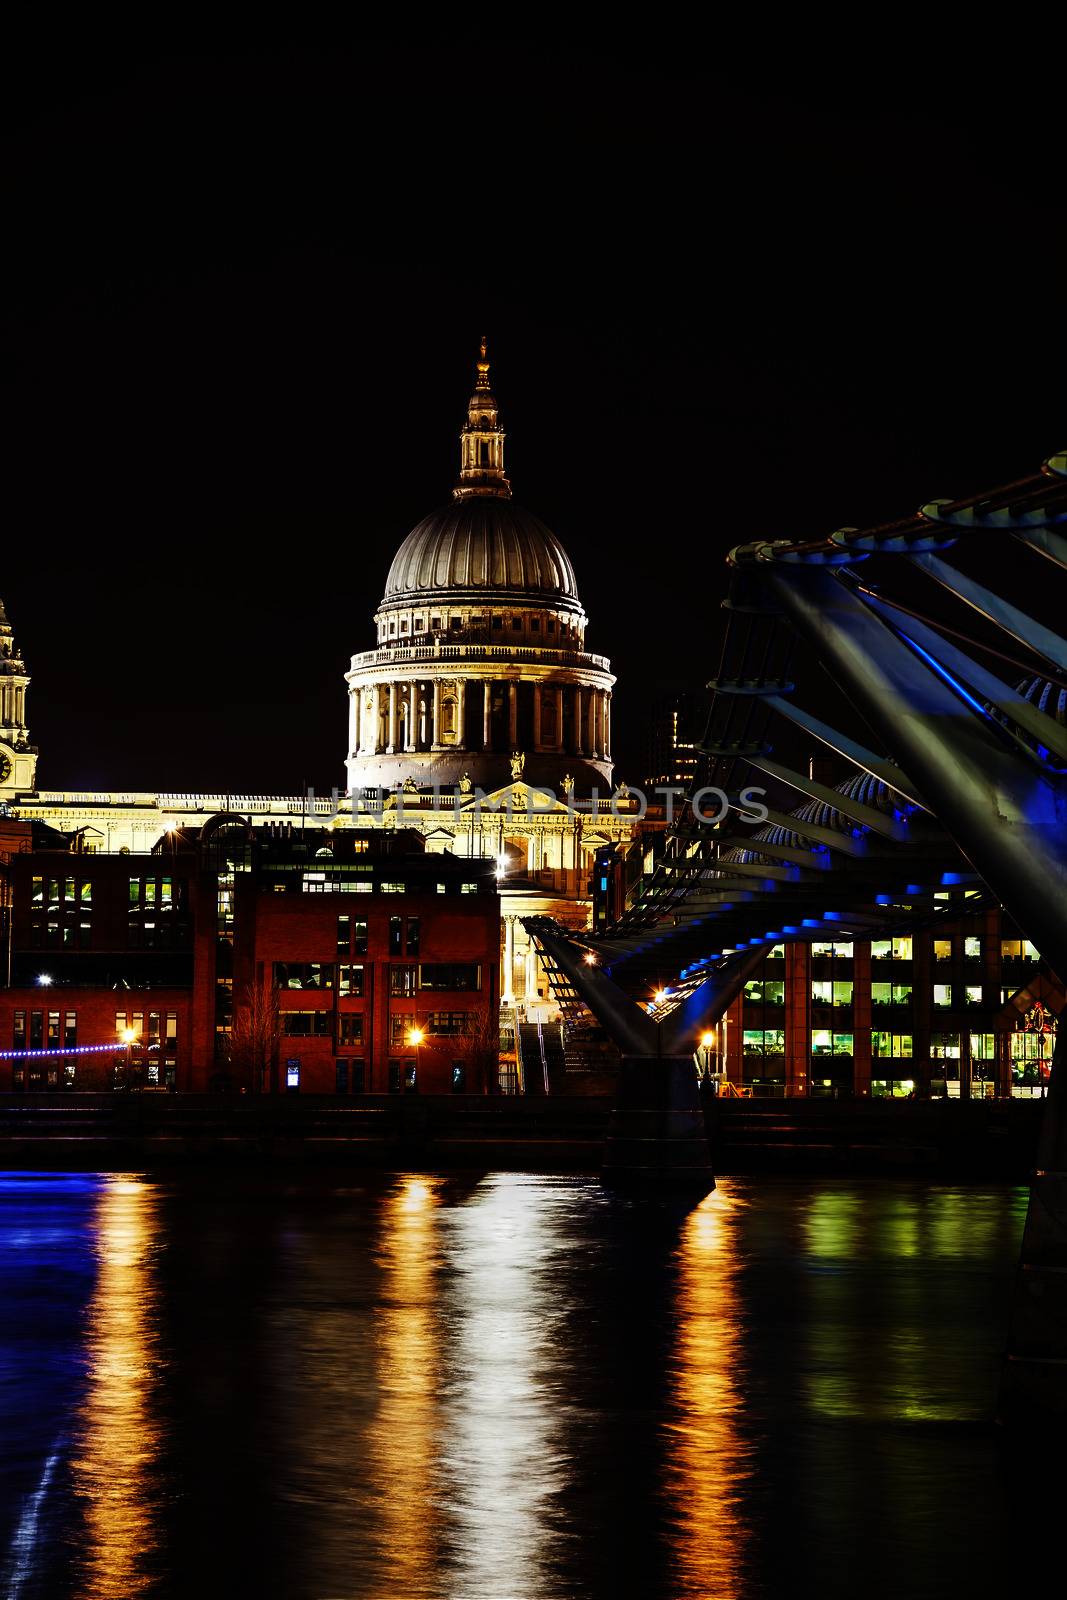 Saint Paul's cathedral in London by AndreyKr